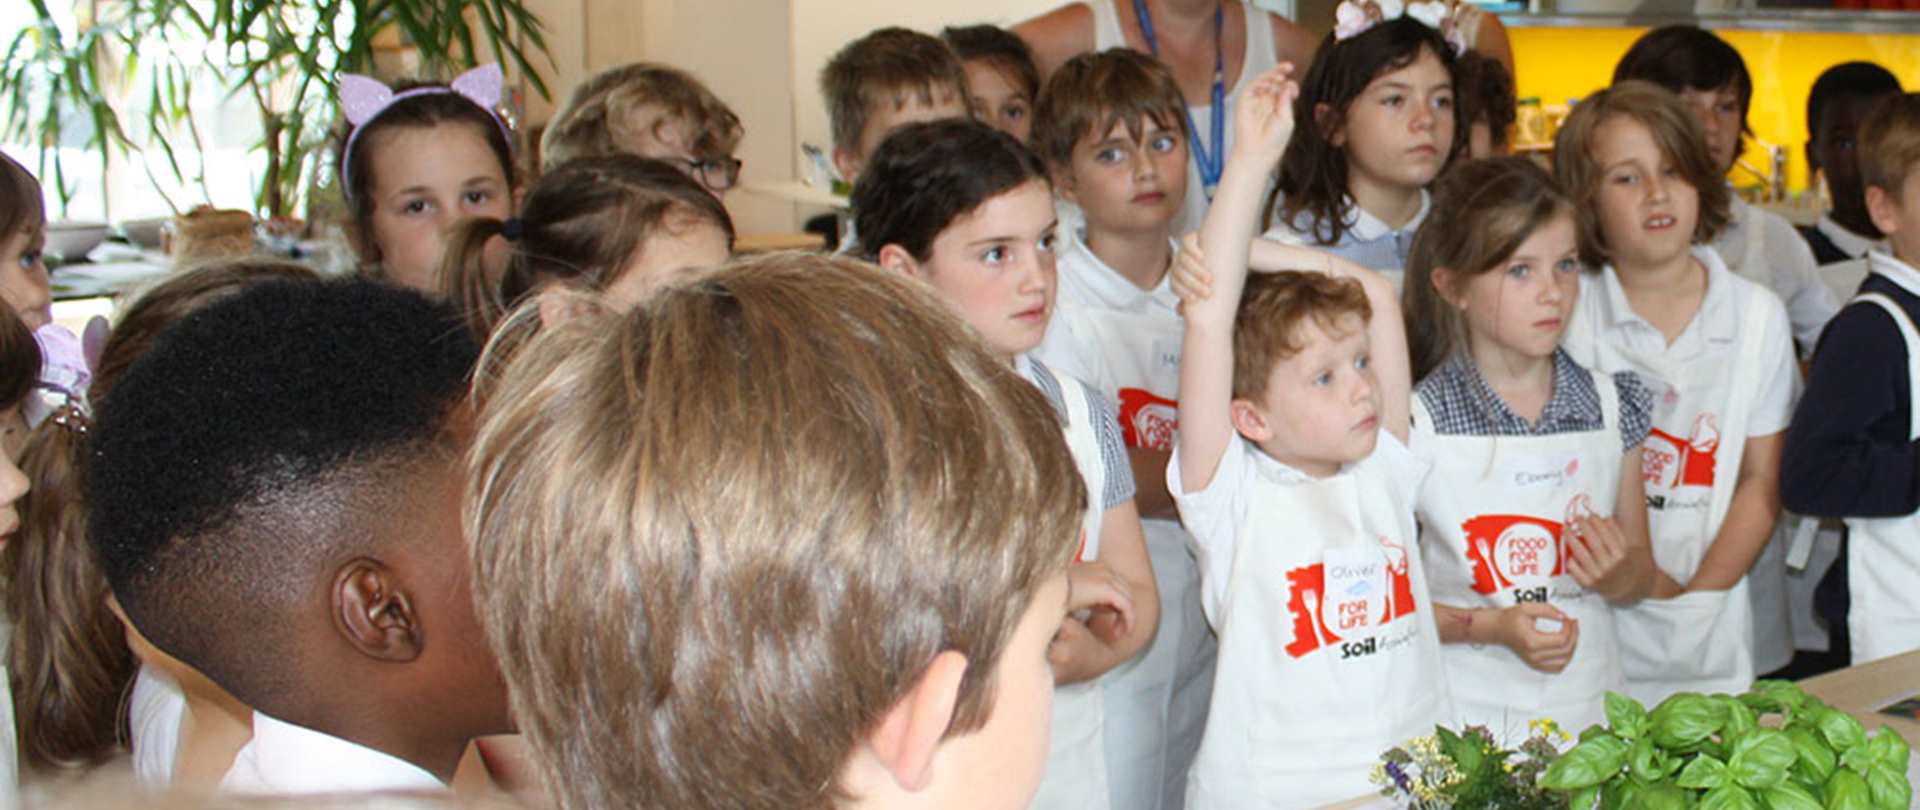 Group of children wearing aprons answering questions at a cooking class